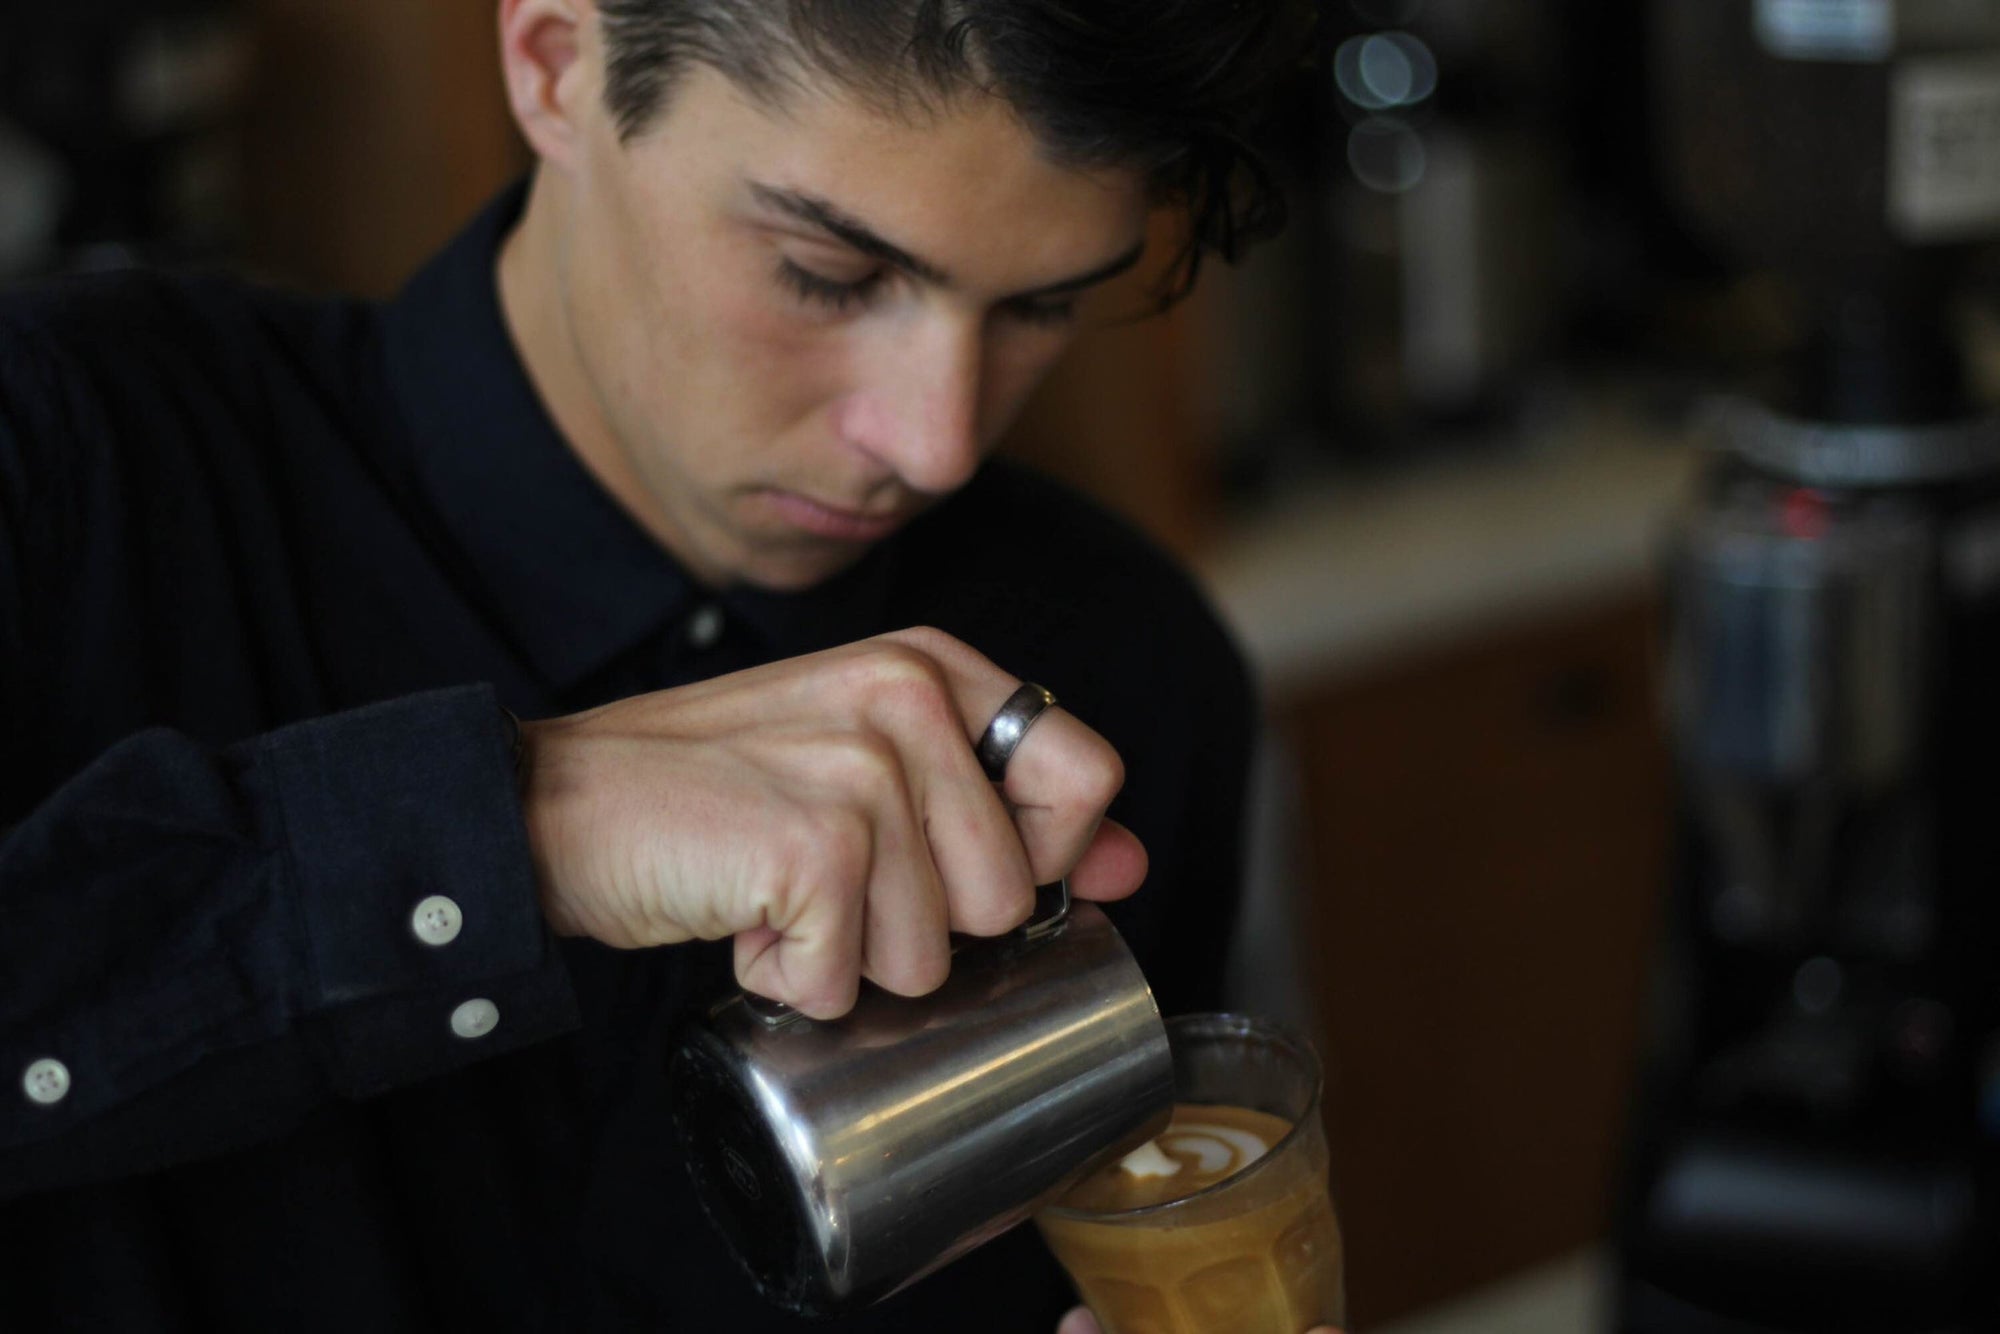 What makes specialty coffee special?